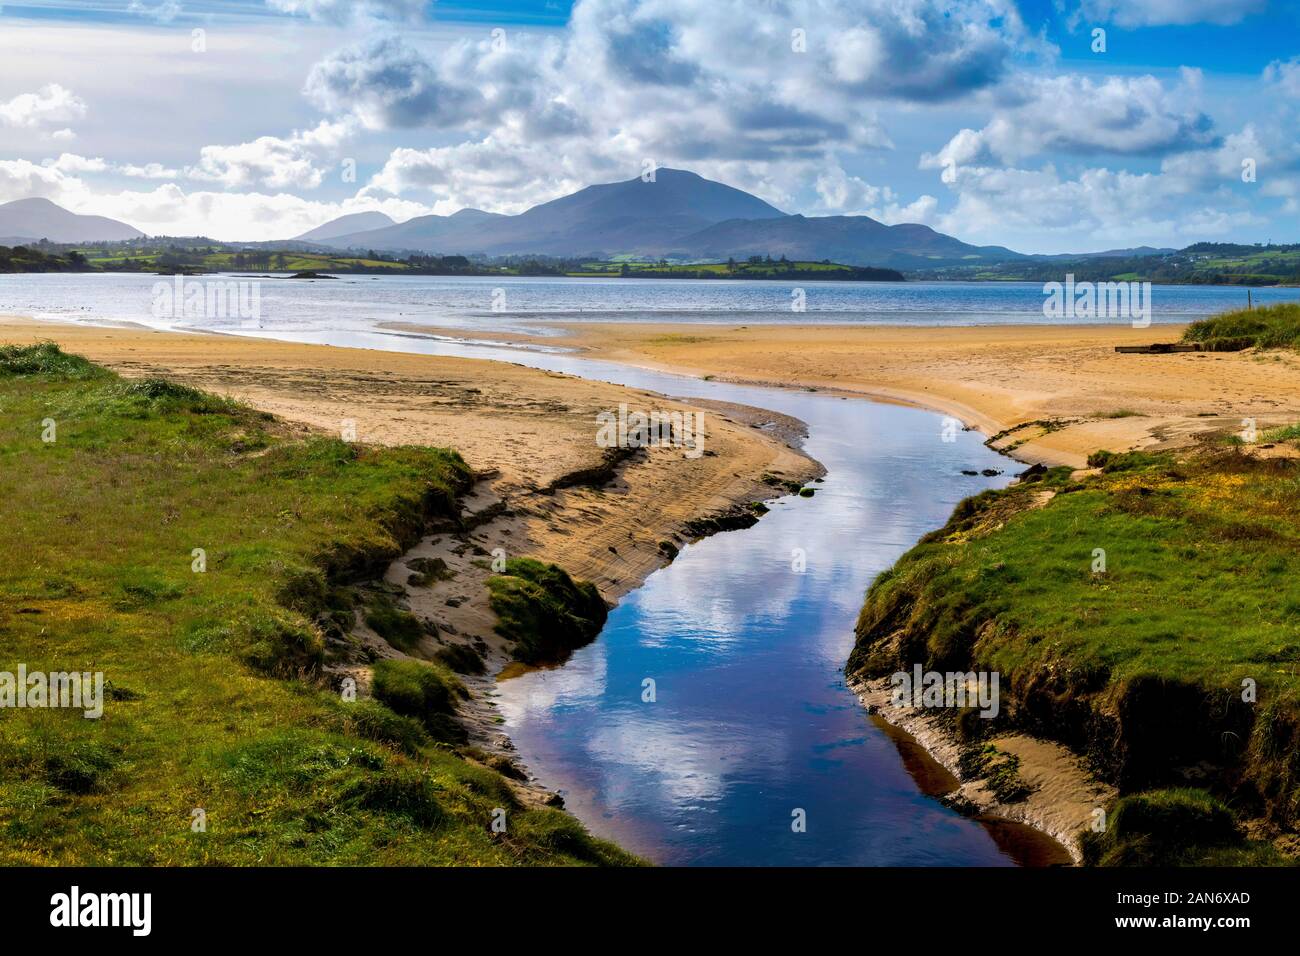 Donegal Boardwalk resort at Tramore Beach Downings donegal Ireland Stock Photo